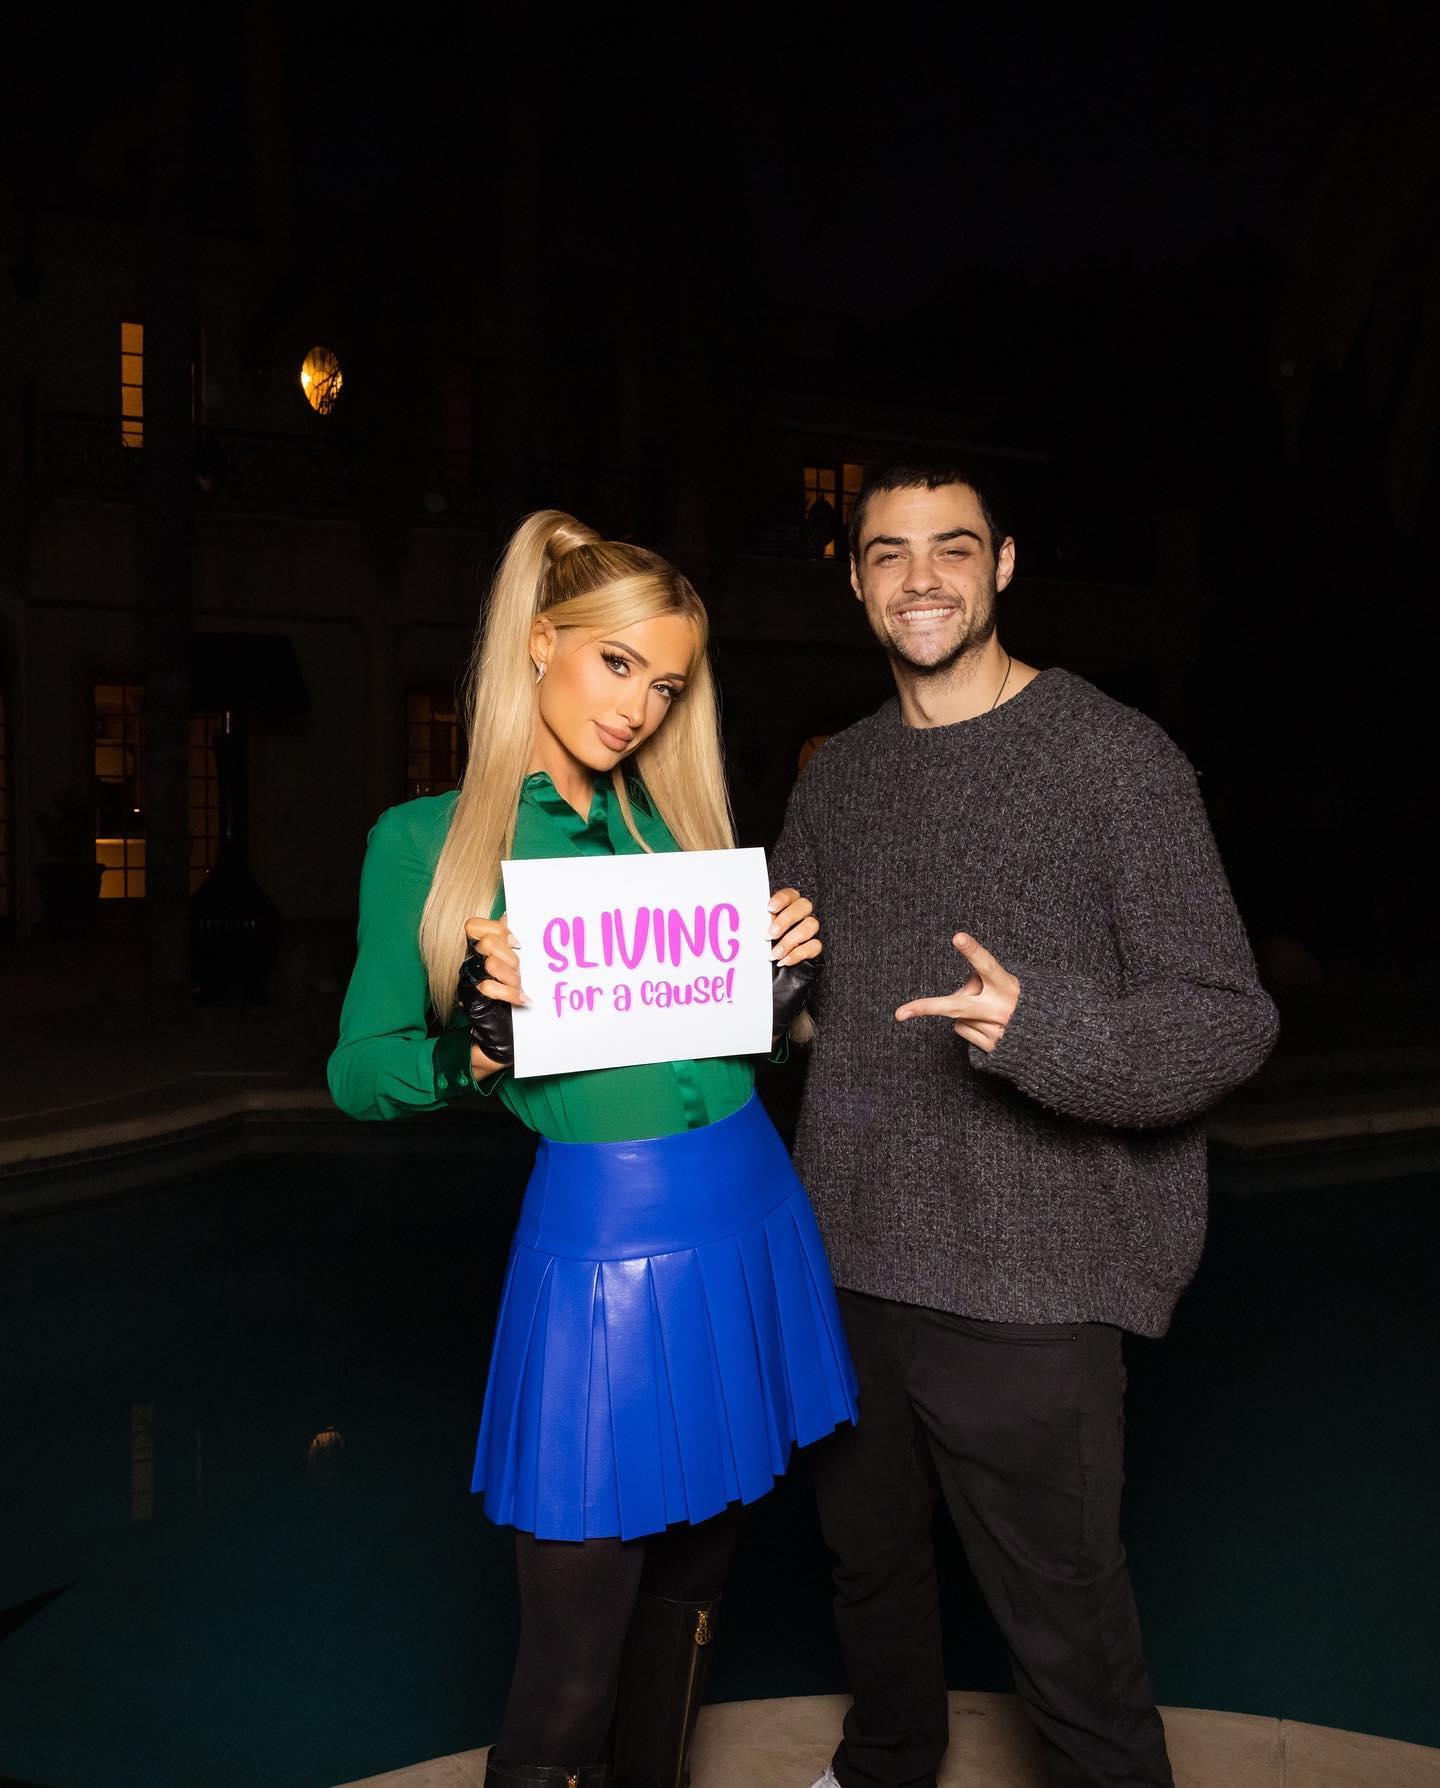 Paris Hilton and Noah Centineo sliving for a cause on Giving Tuesday